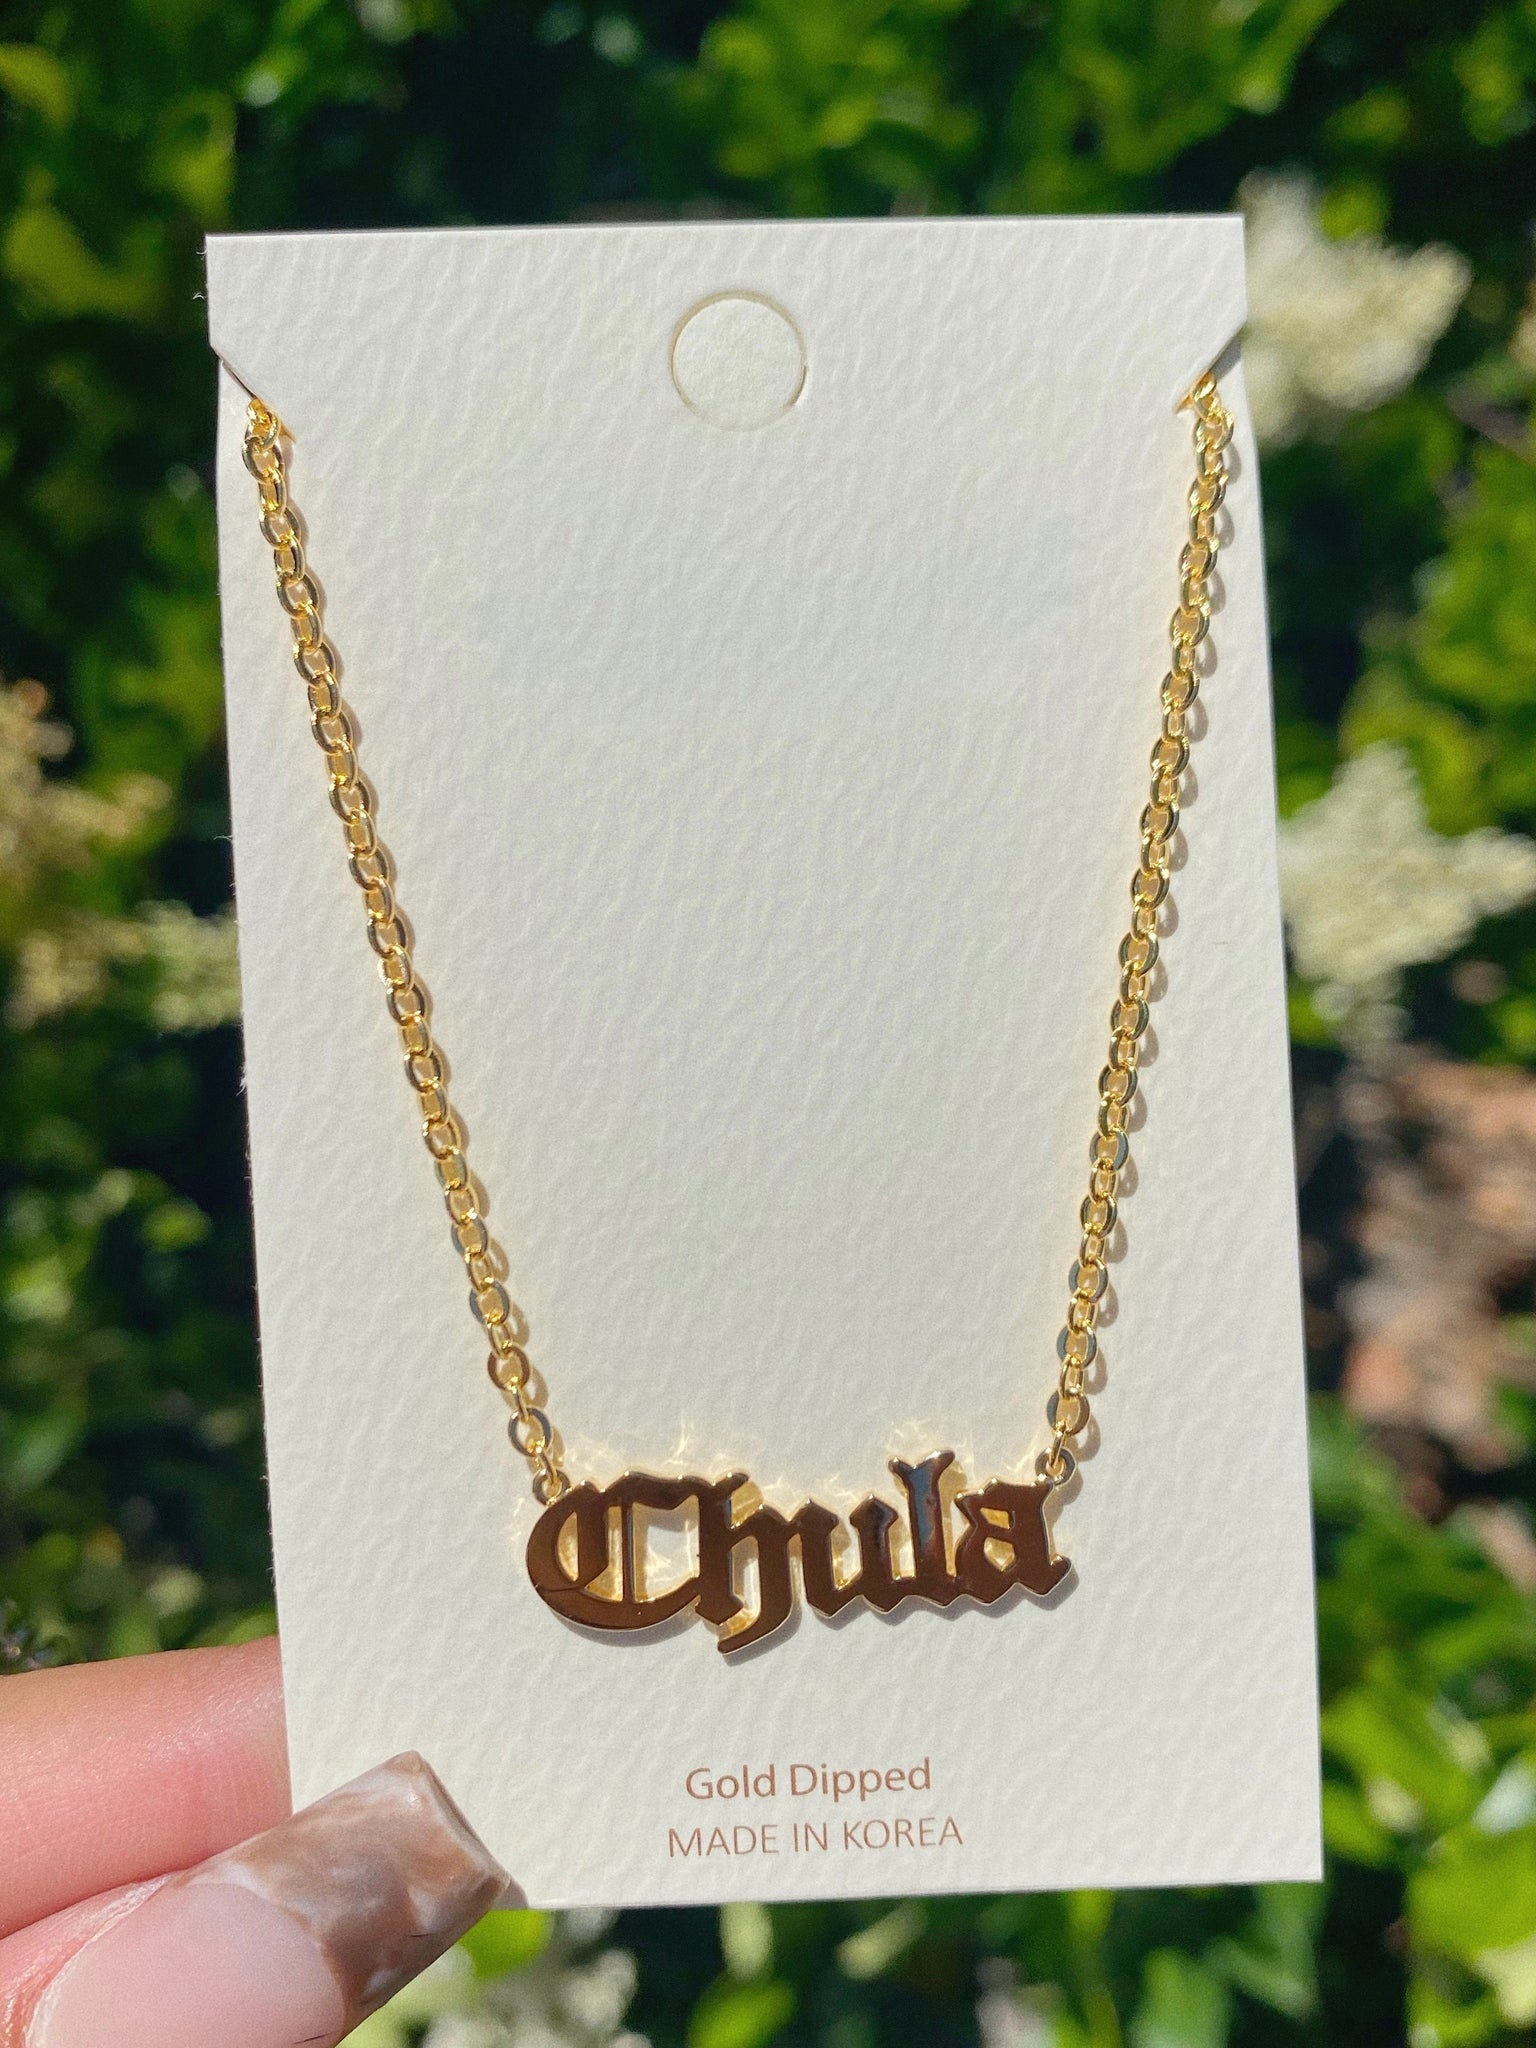 chula necklace (GOLD DIPPED)